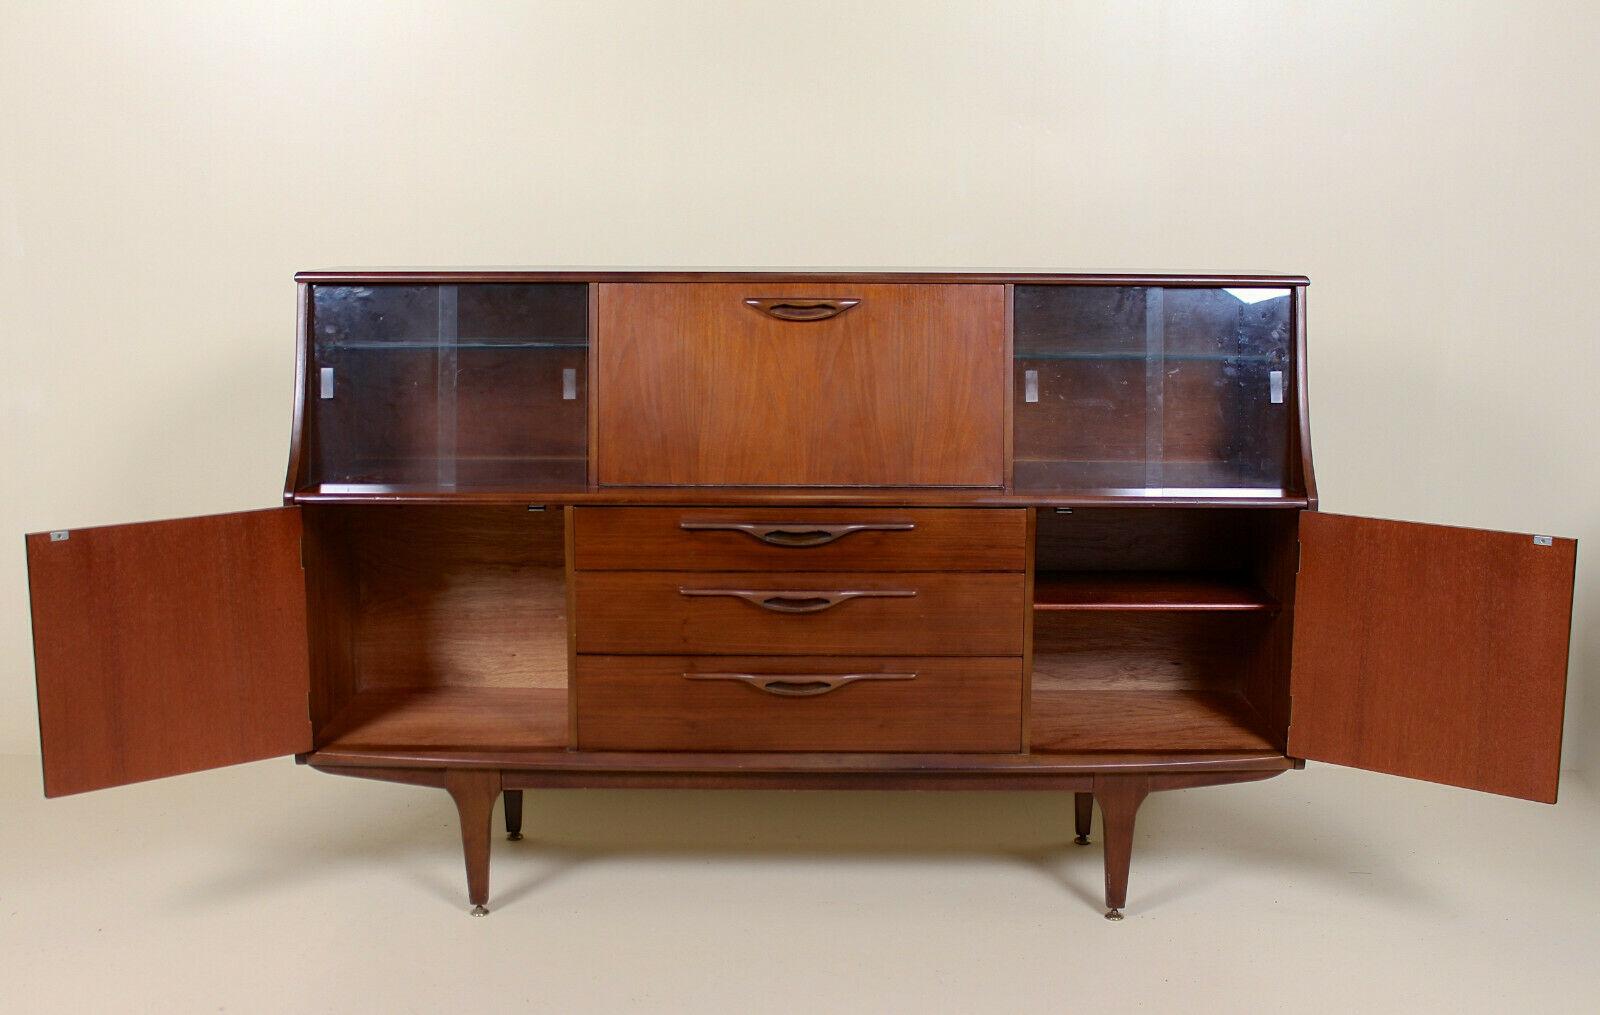 Mid-20th century, (circa 1970) teak glazed cocktail sideboard. The fall flap enclosed mirrored interior and lighting and flanked by sliding glazed doors enclosed glass shelving. Fitted three long drawers below with solid interiors flanked by